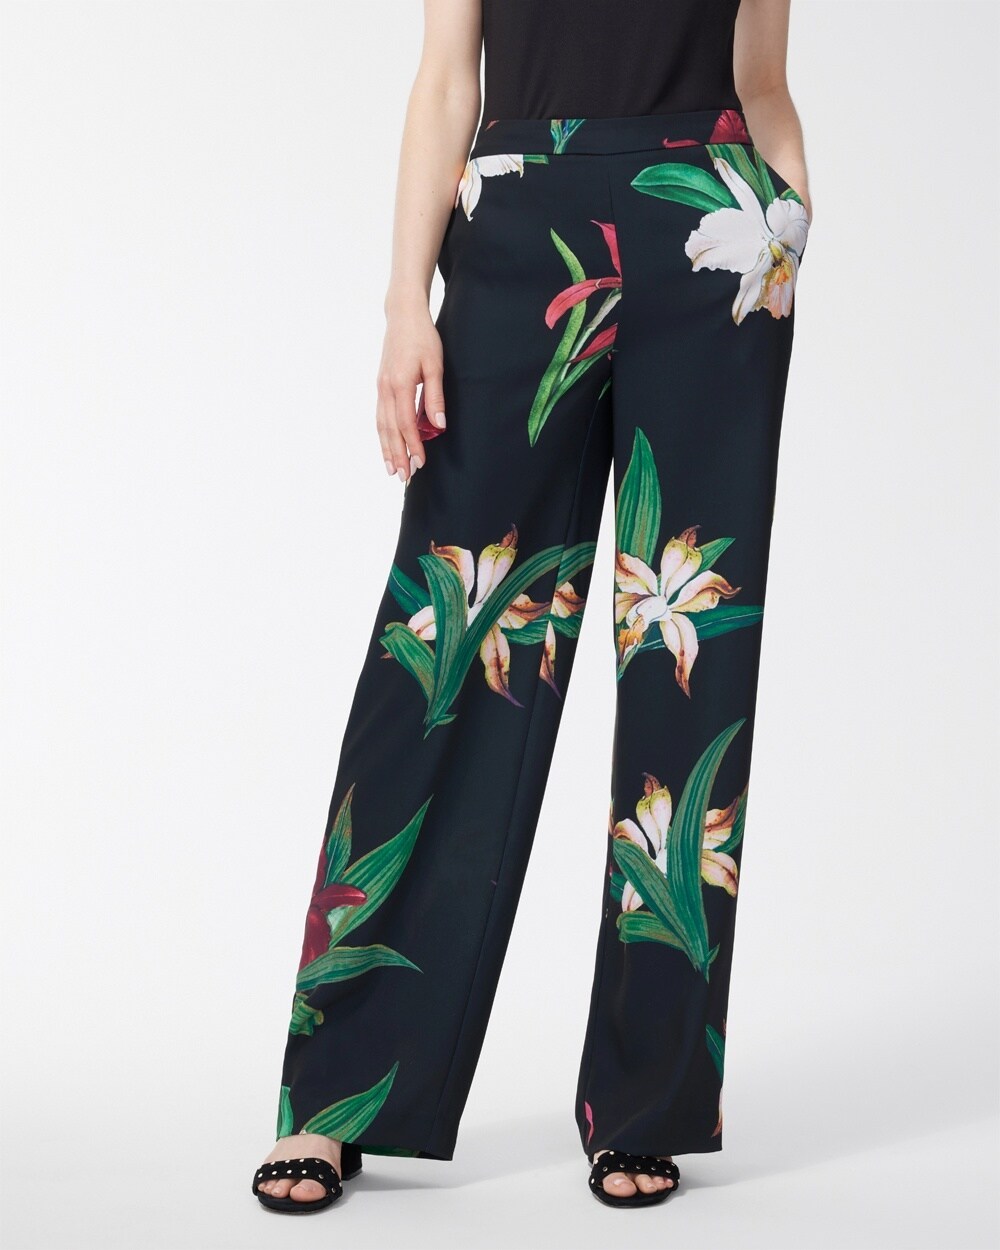 10 Outfits With Floral Pants